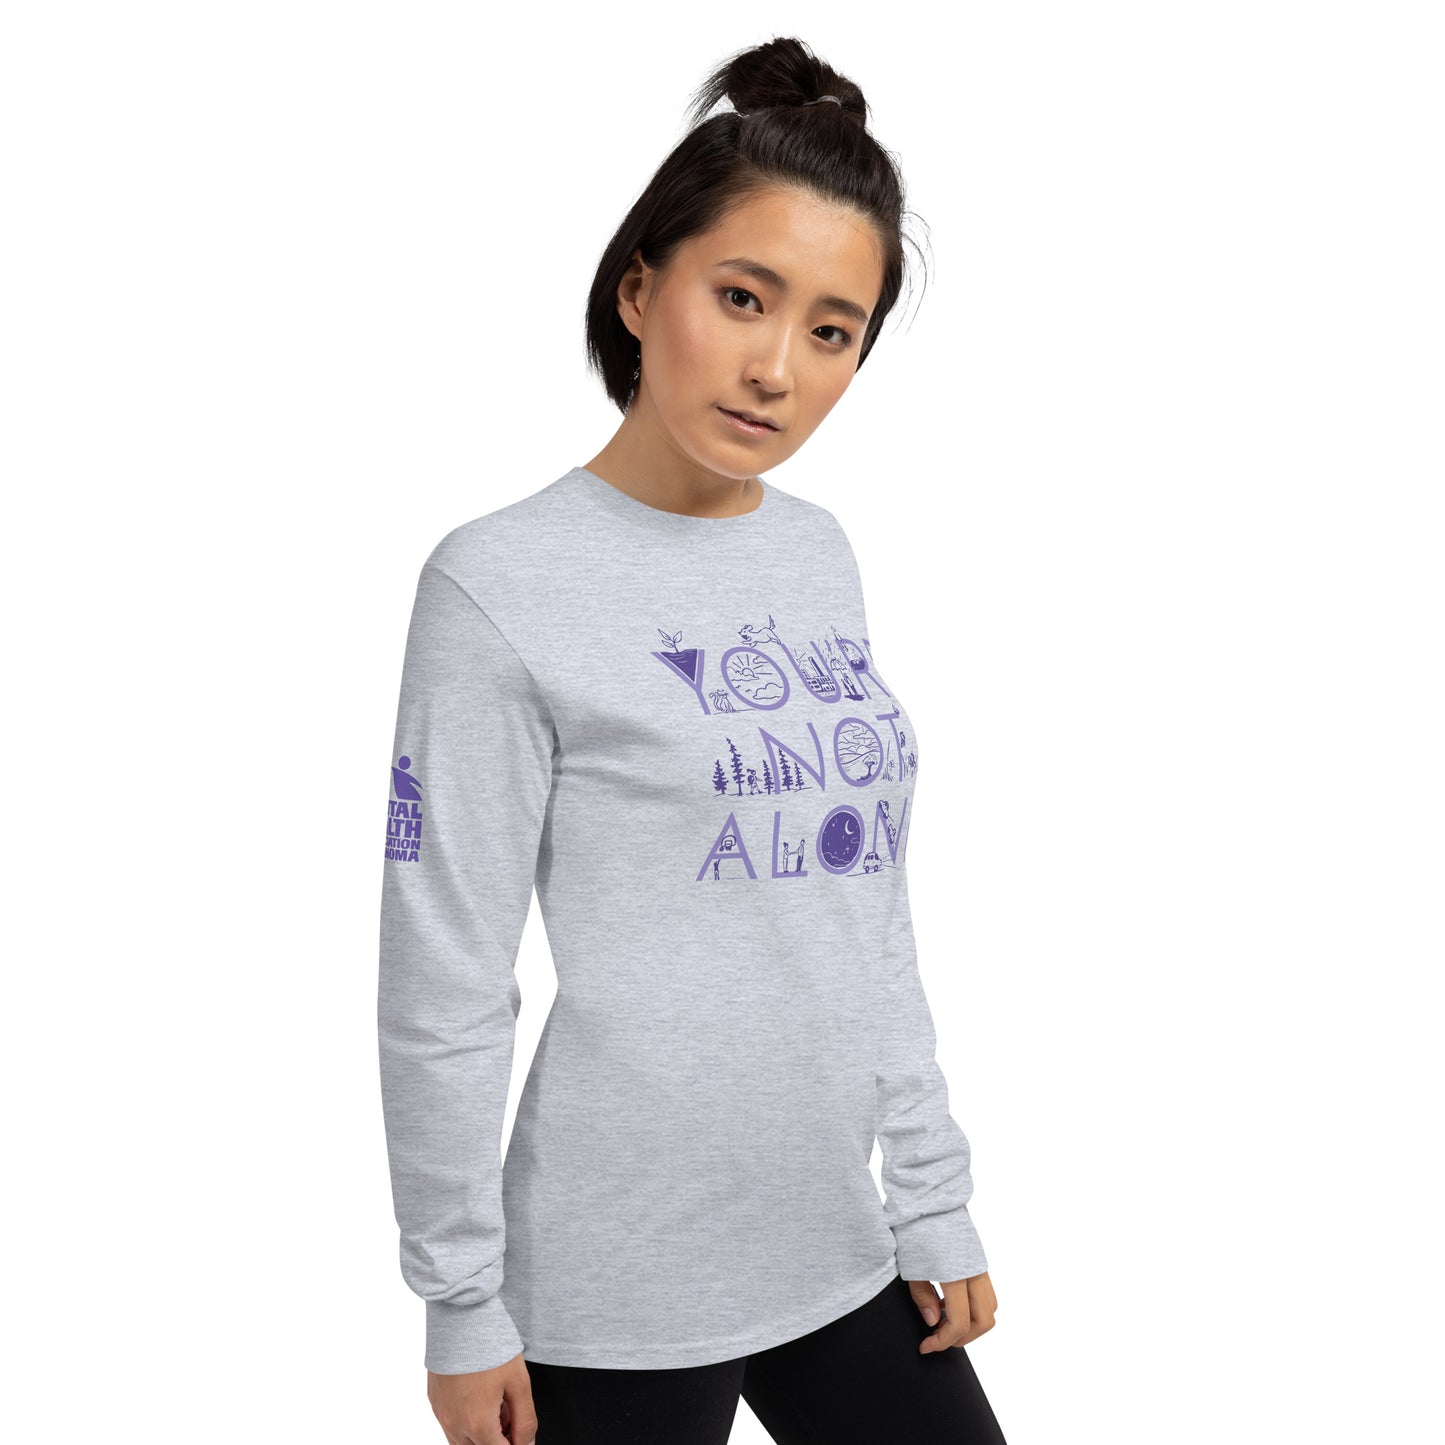 You're Not Alone long sleeve t-shirt